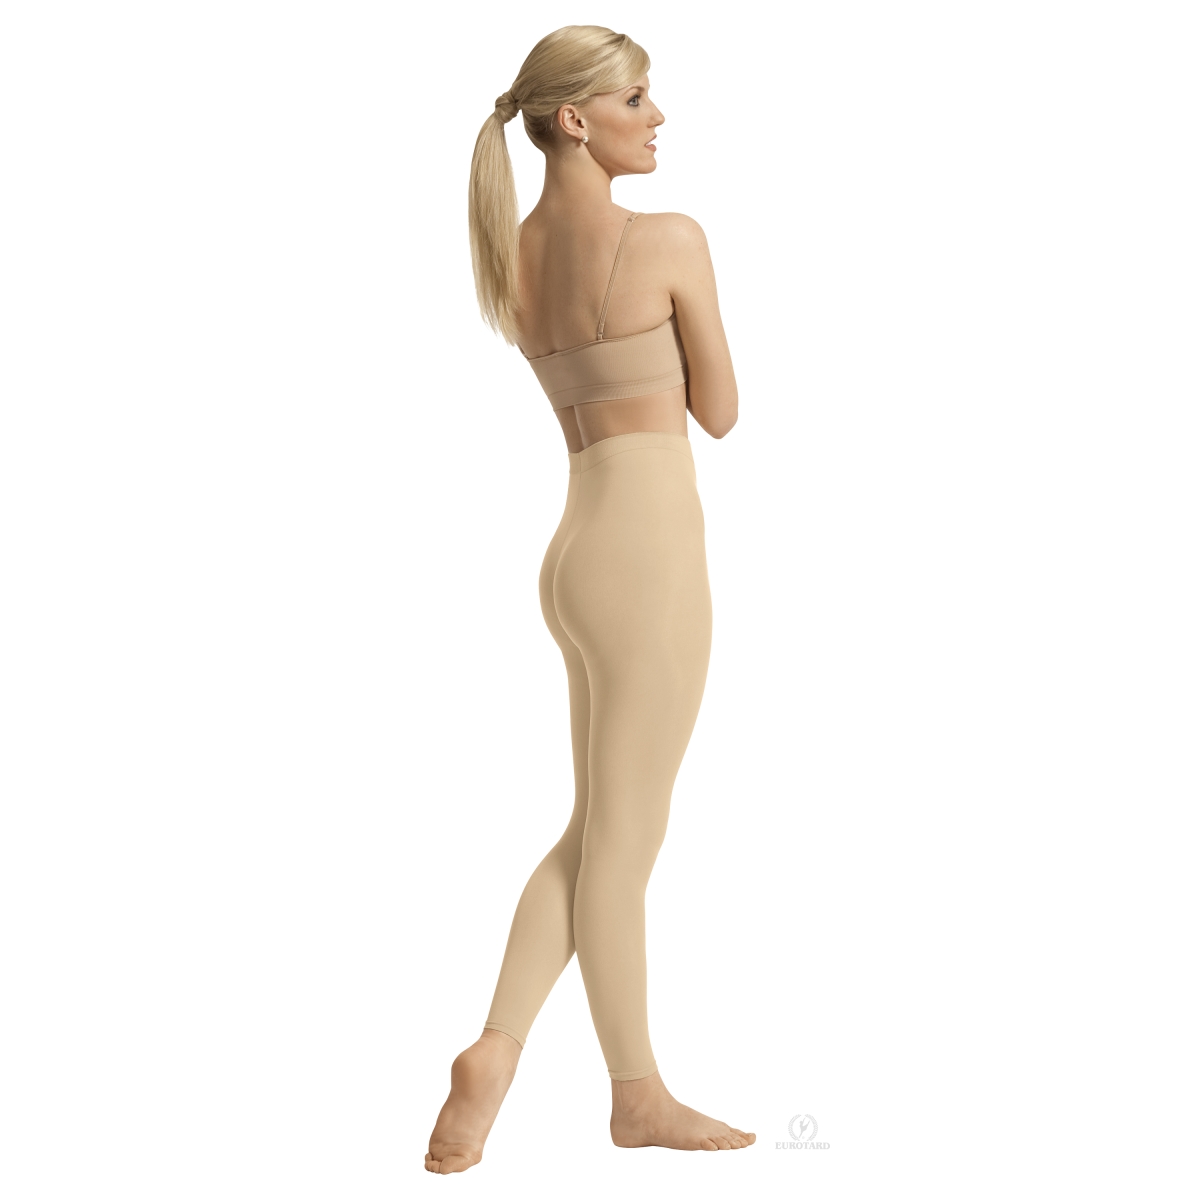 212-st-l-xl Intimates Adult Non-run Footless Tights, Suntan - Large & Extra Large